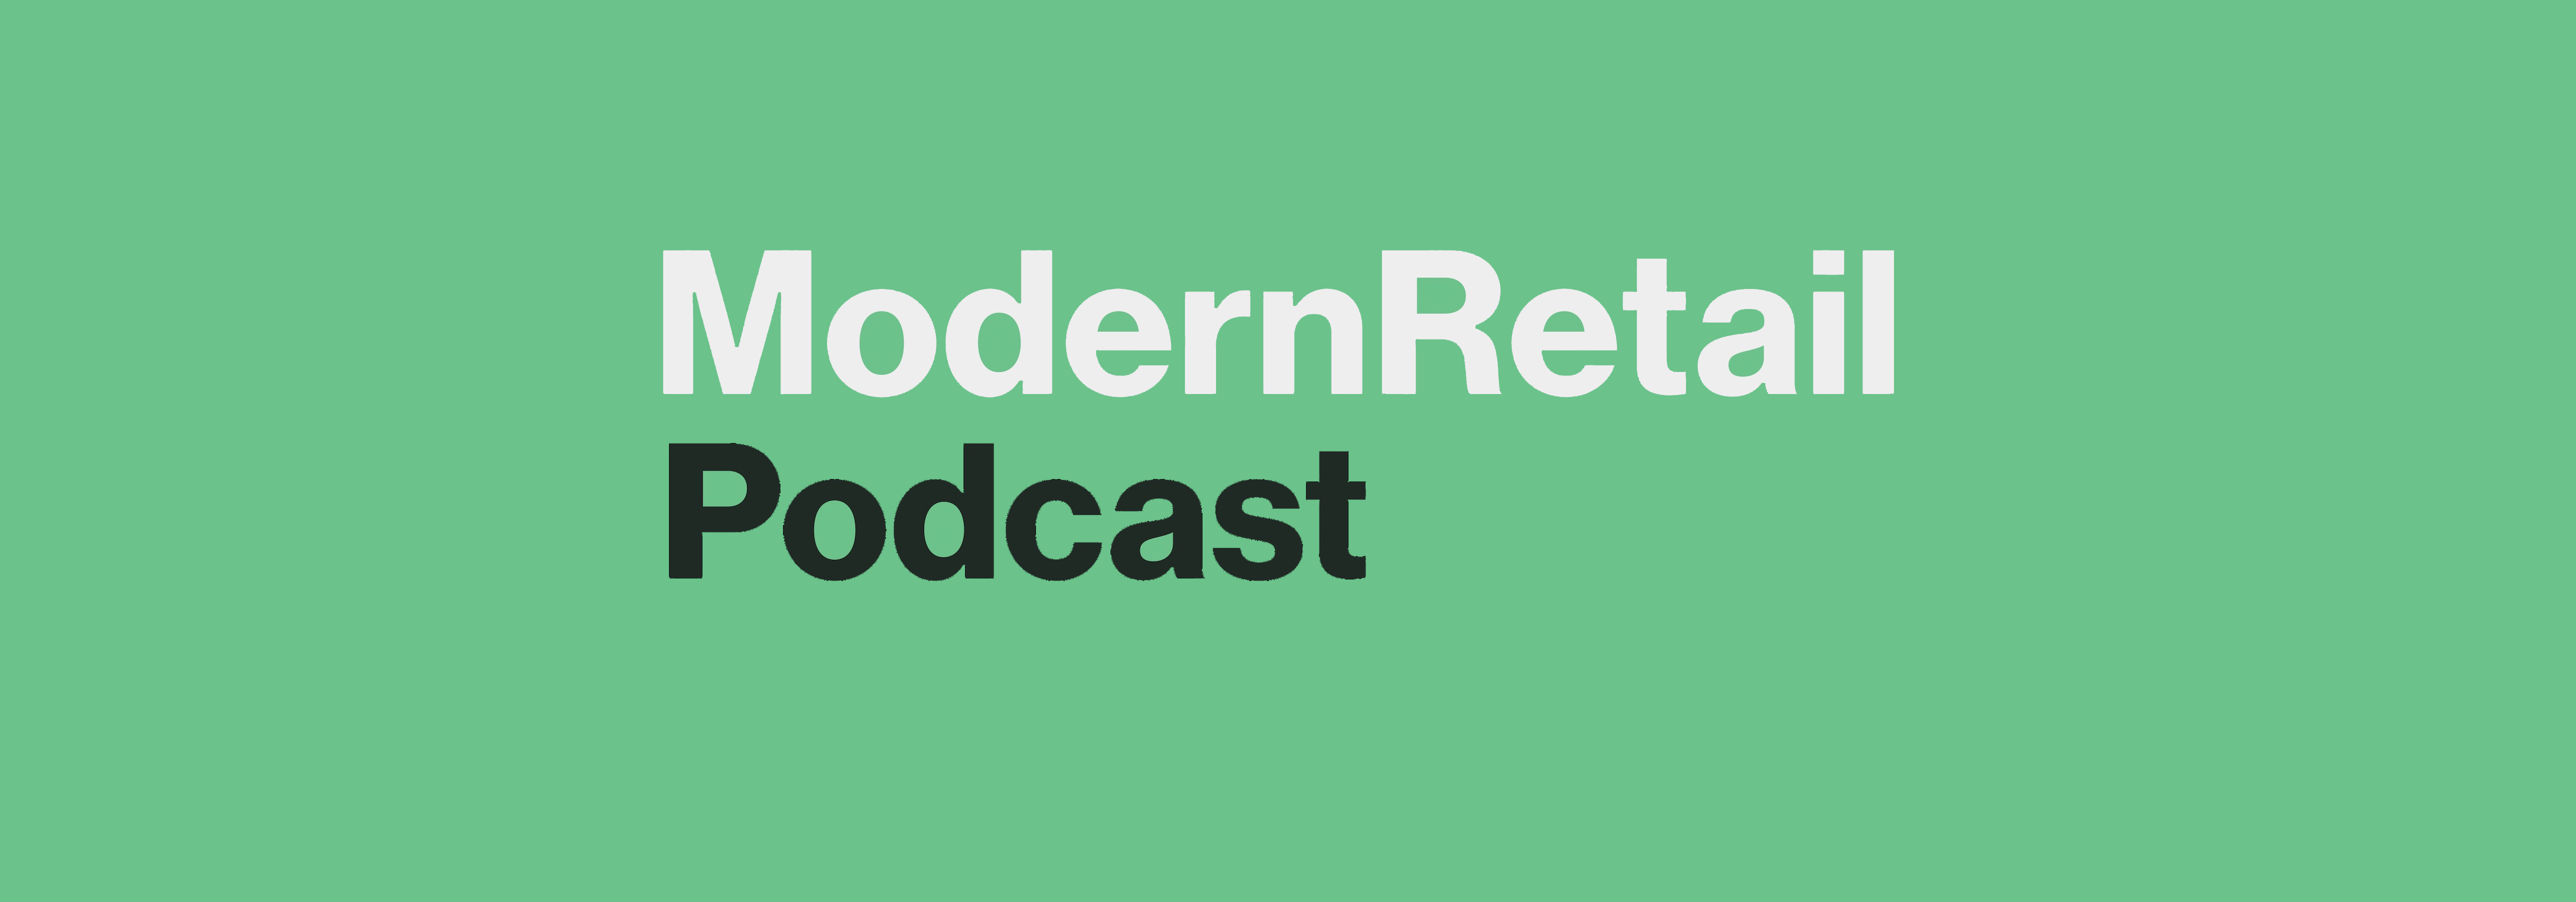 Modern Retail Launches the Modern Retail Podcast